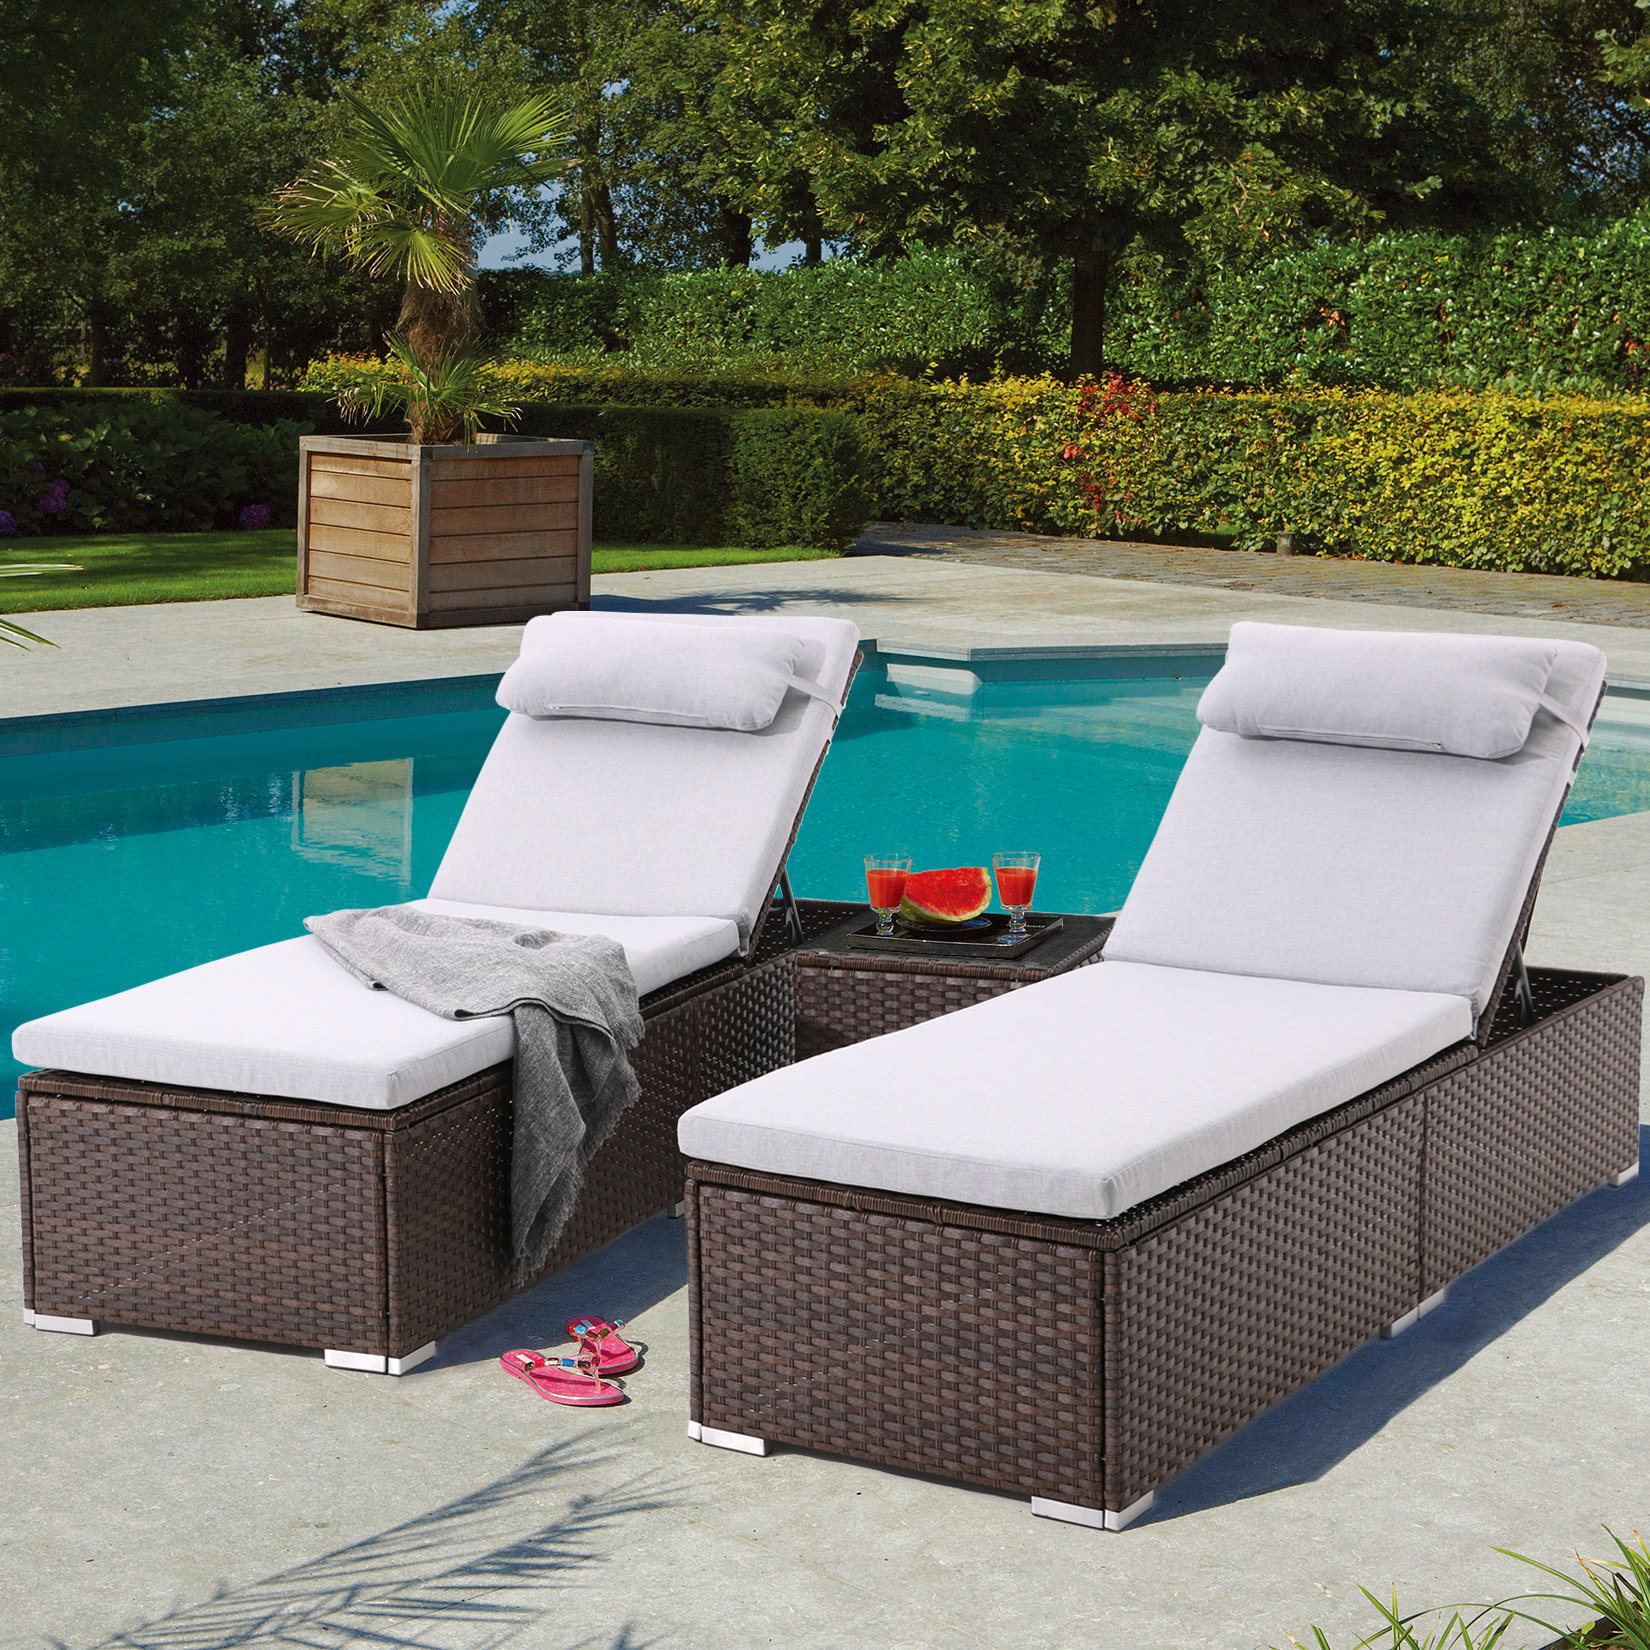 SaorSio Outdoor Wicker Chaise Lounge with Table | Wayfair